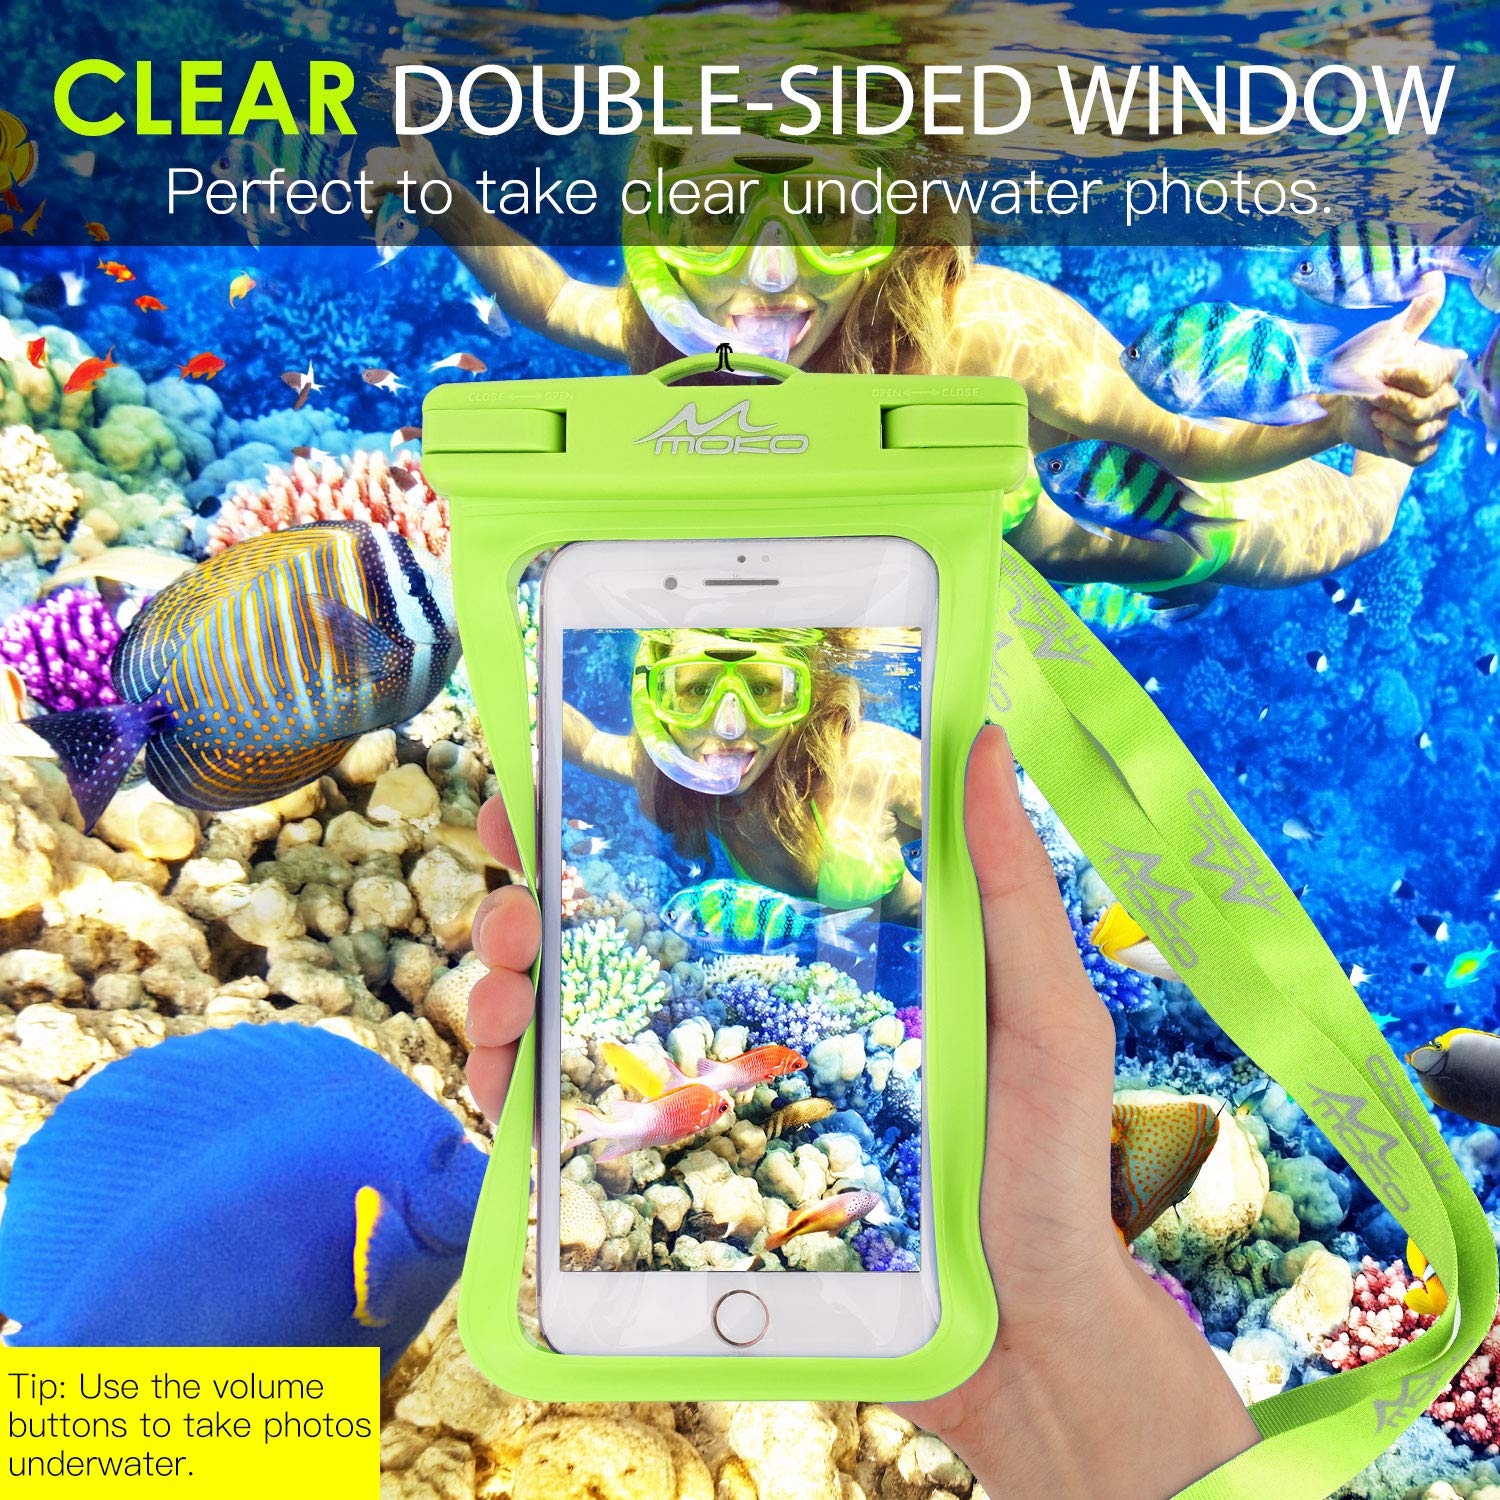 MoKo Waterproof Phone Pouch Holder [2 Pack], Underwater Phone Case Dry Bag with Lanyard Compatible with iPhone 14 13 12 11 Pro Max X/Xr/Xs Max/SE 3, Samsung S21/S10/S9/S8 Plus, Blue+Green+Pink